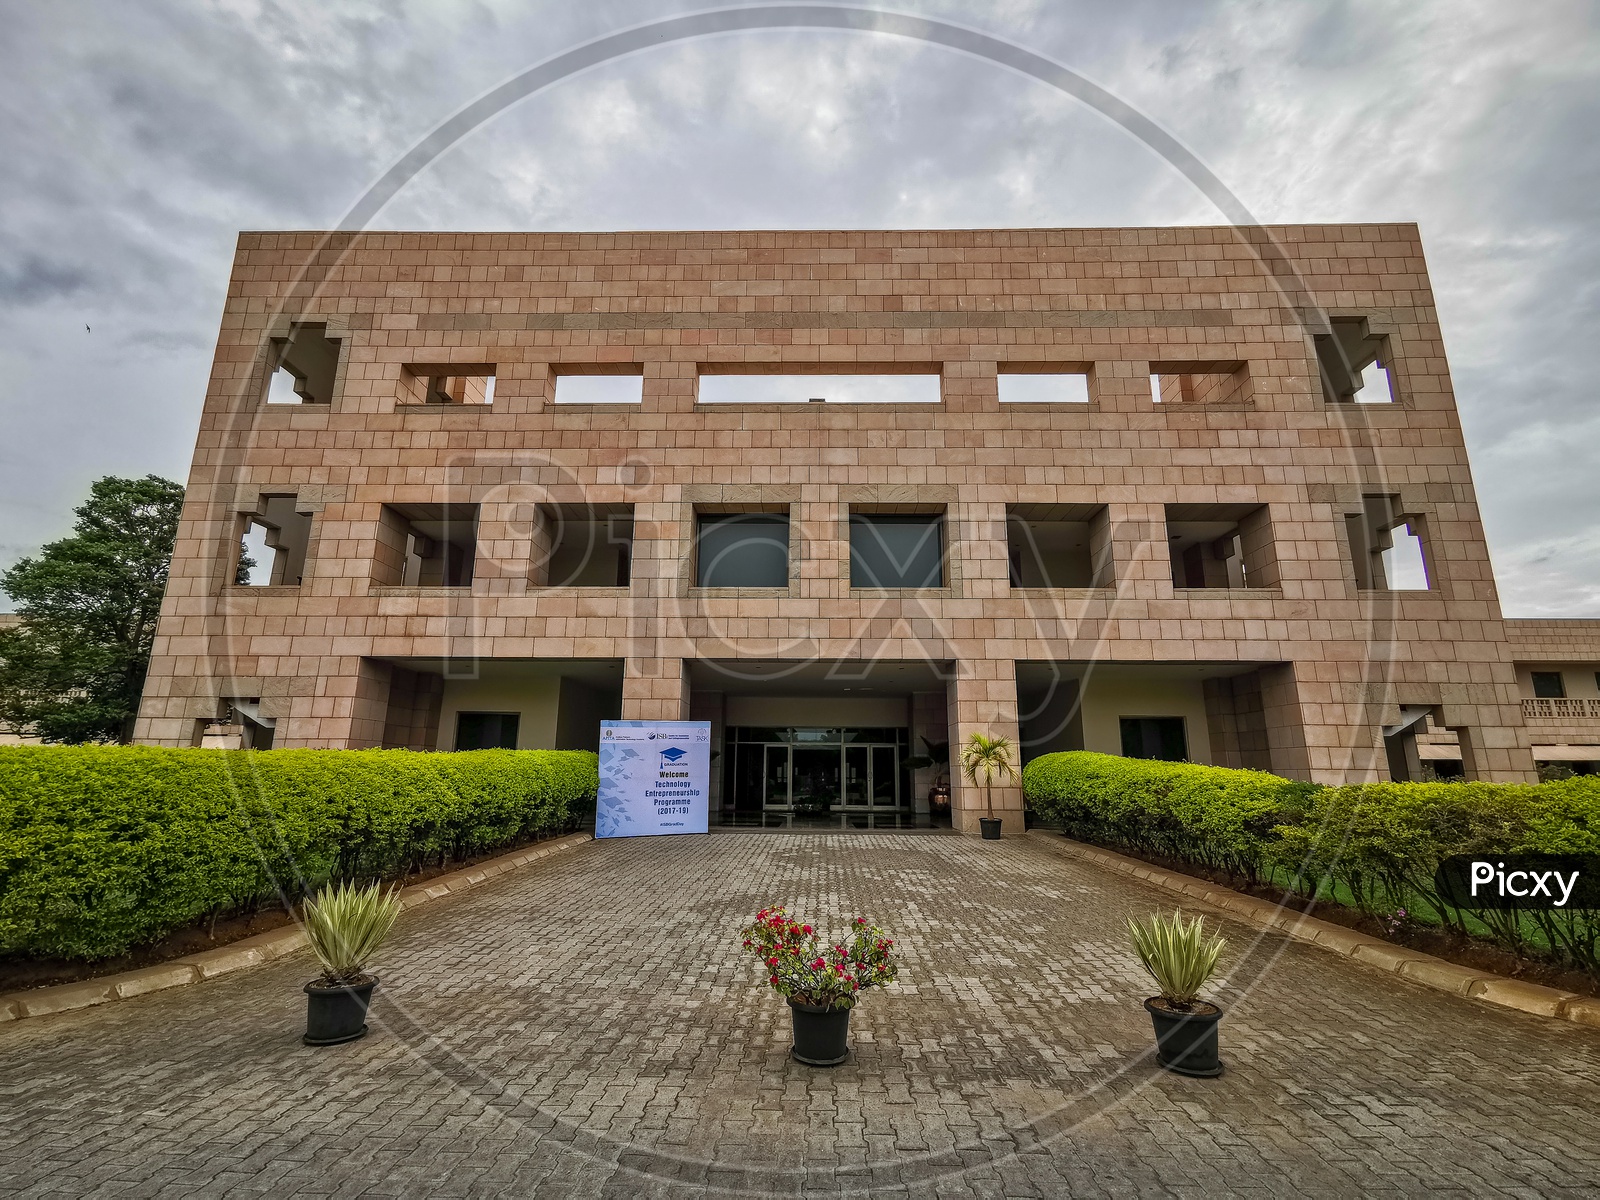 ISB (Indian School of Business) Main Building View from Outside